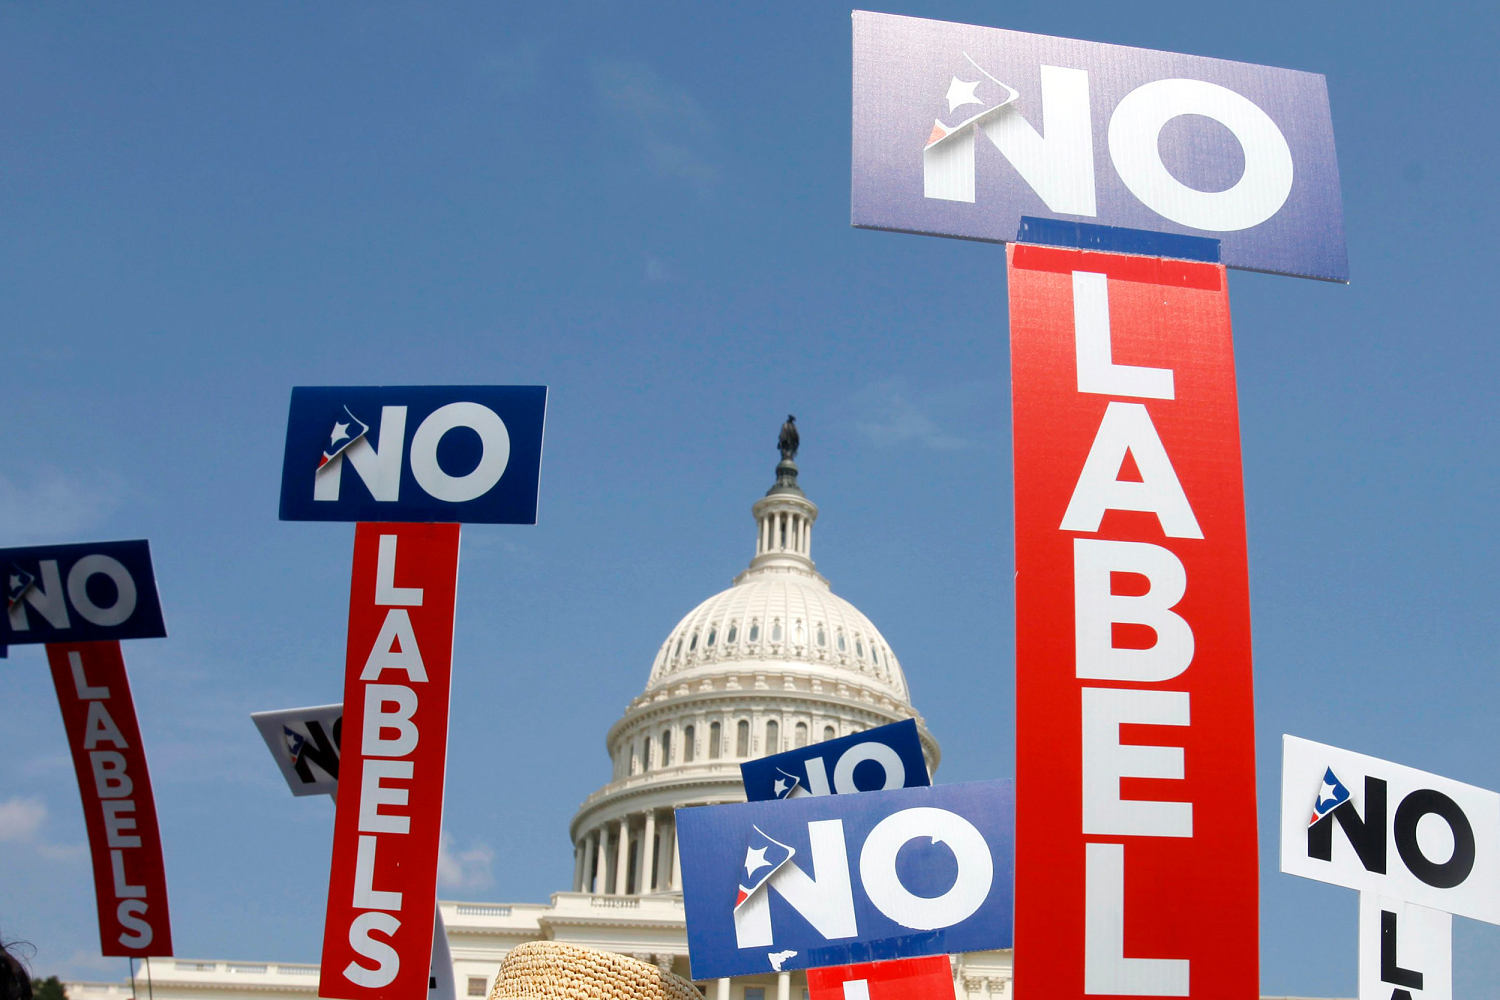 no labels floats the possibility of a coalition government or congress selecting the president in 2024